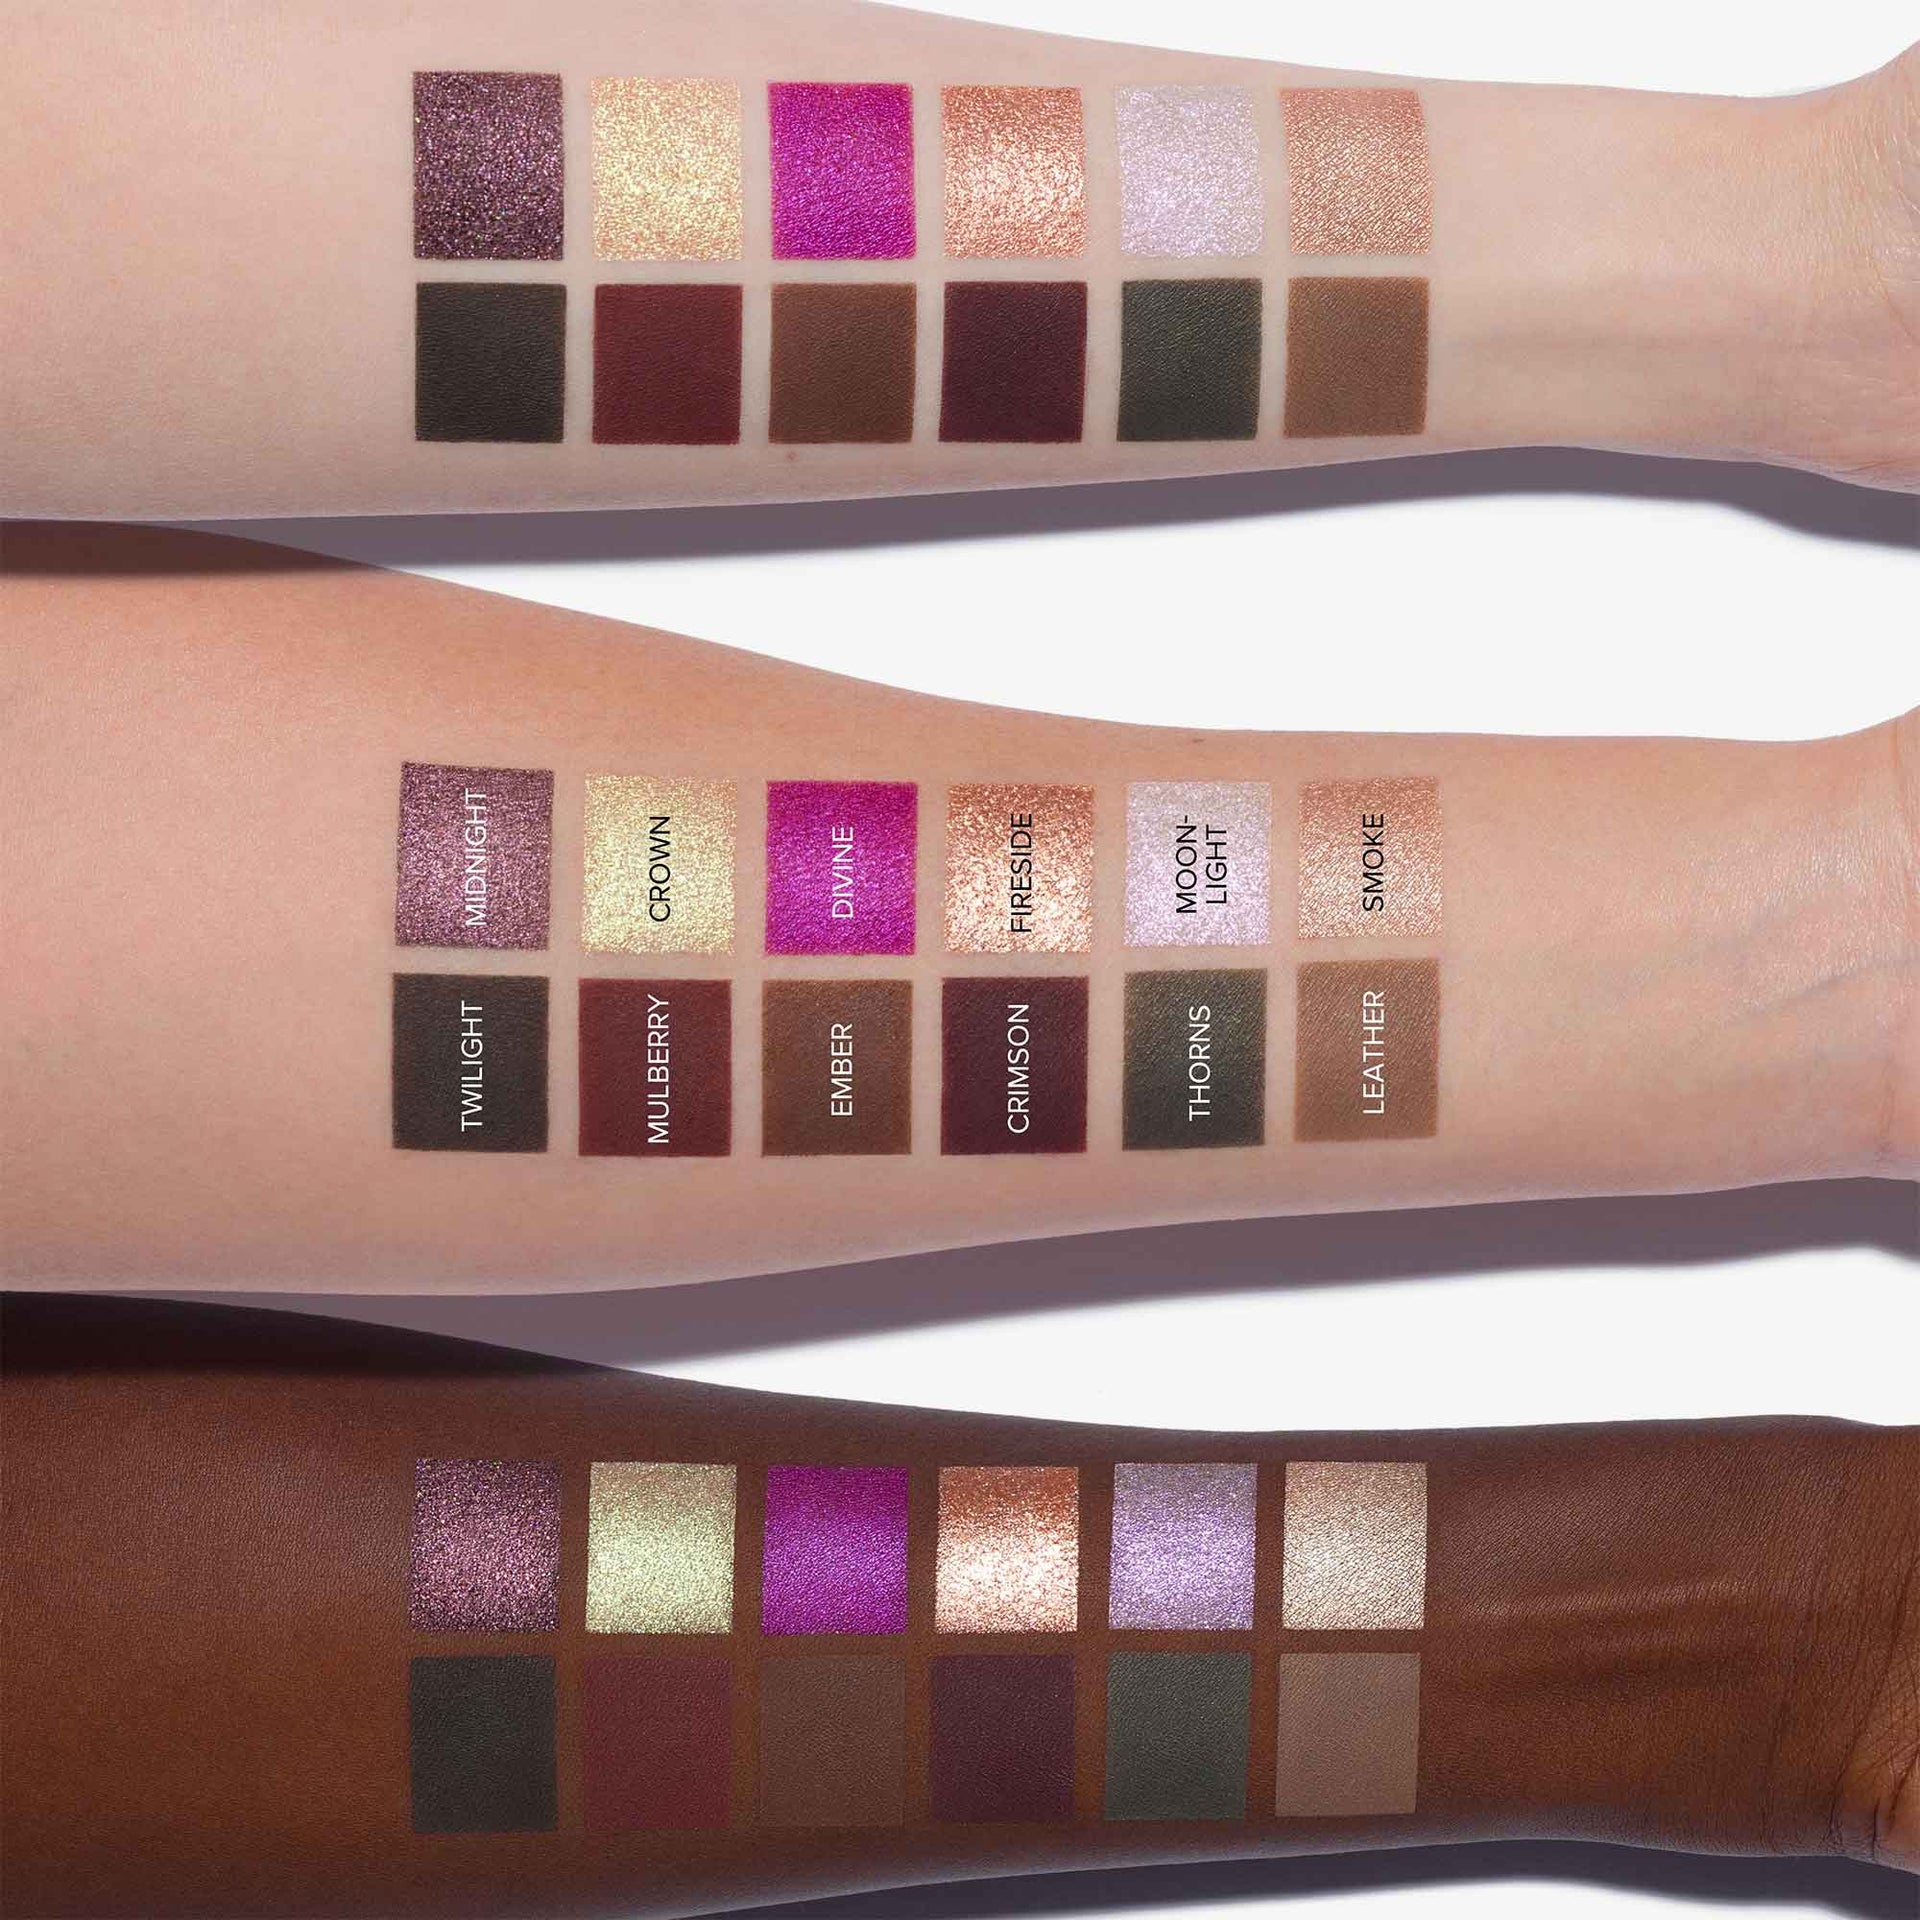 Fall Romance Eyeshadow Palette Arm Swatches